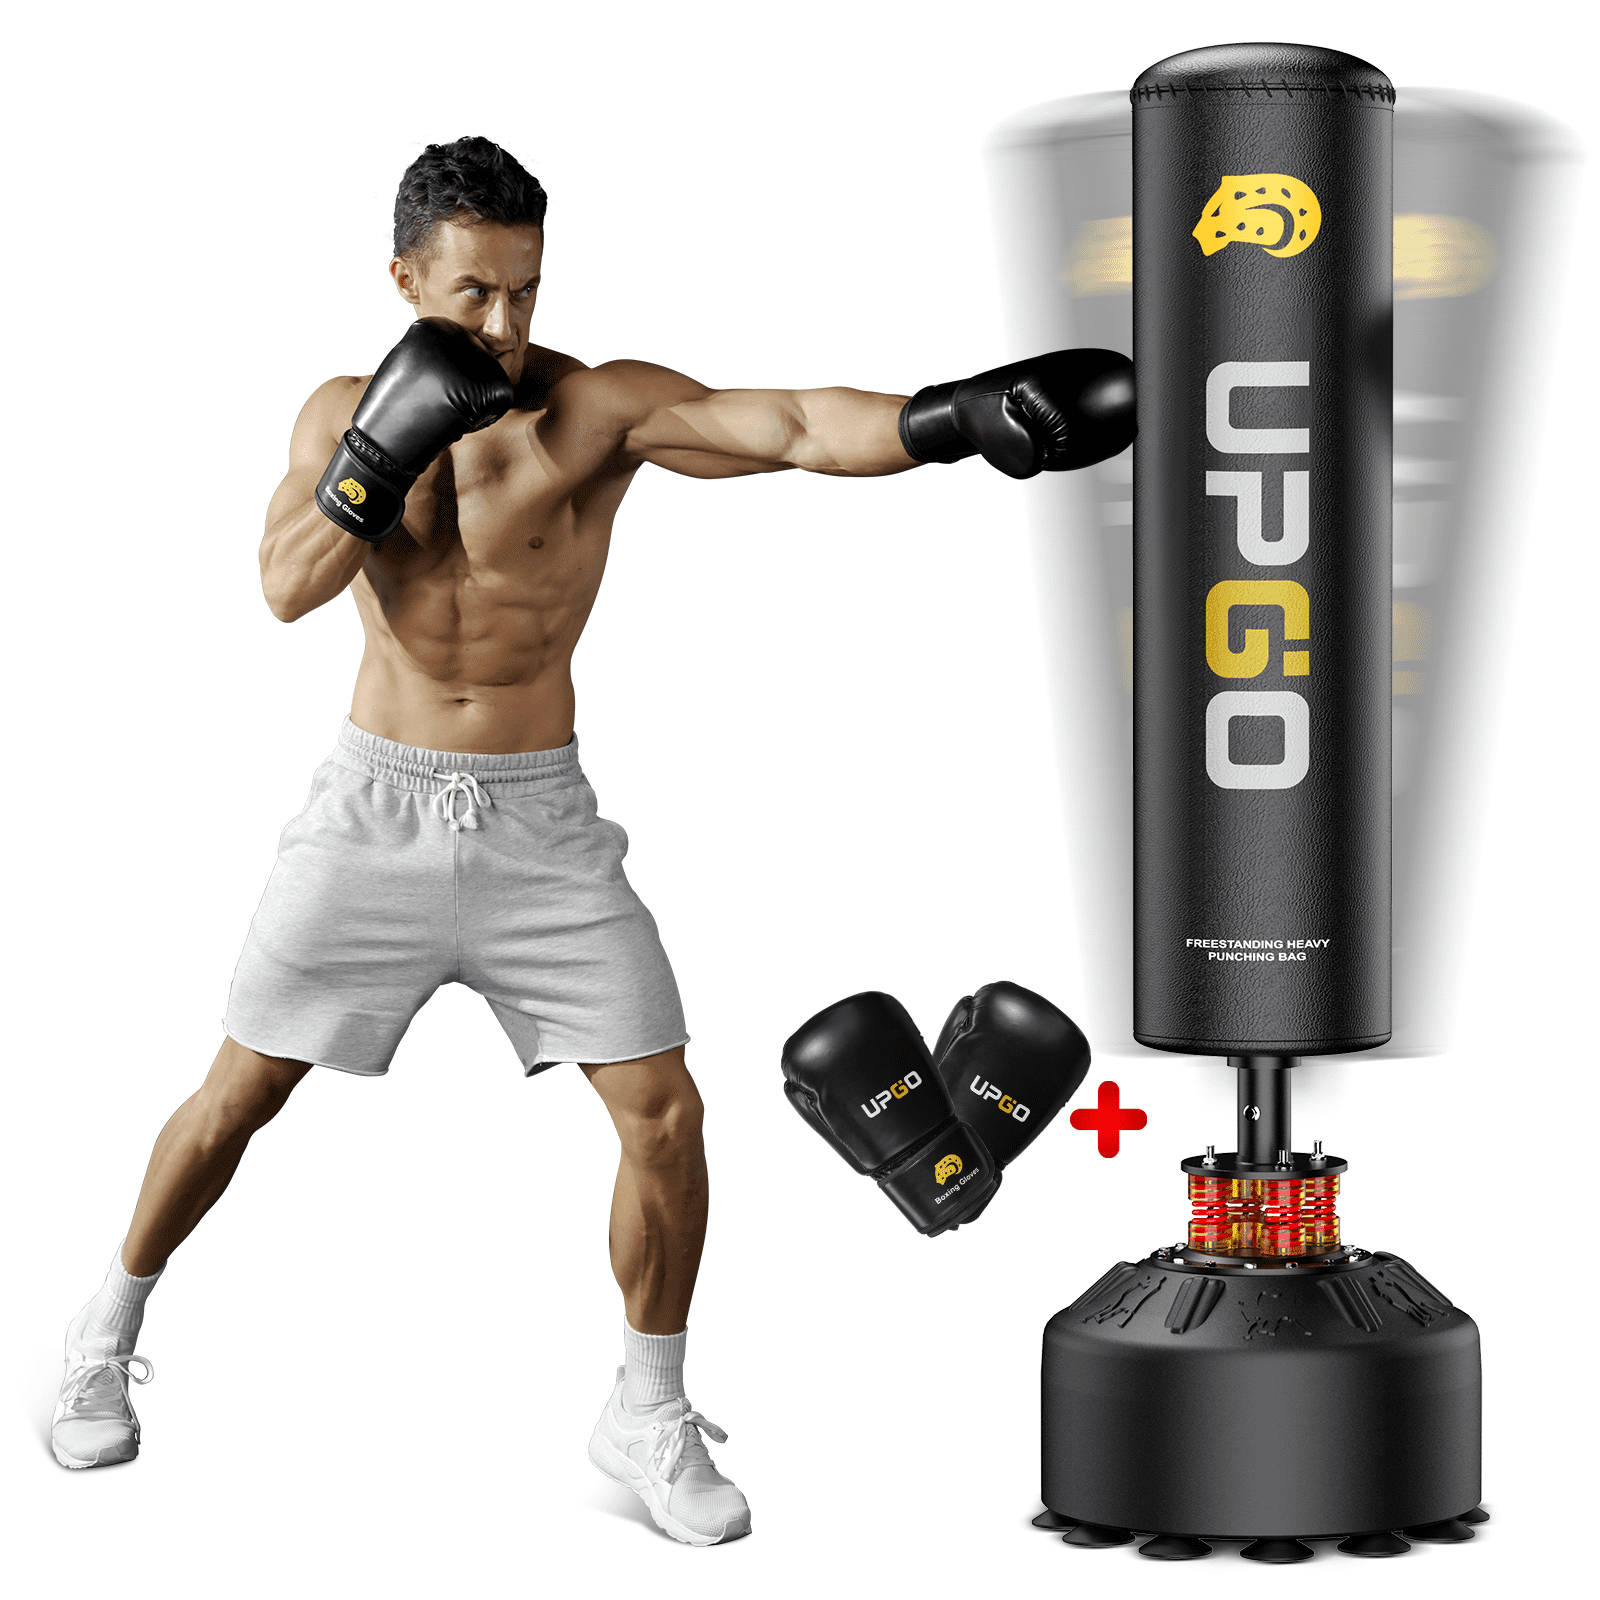 4ft Workout MMA 200 Pound Boxing Bag for Kickboxing… Heavy Boxing Bag for Adults & Youth Adjustable Wall Bracket Ceiling Hook Chain Non Tear Leather Boxing Equipment 